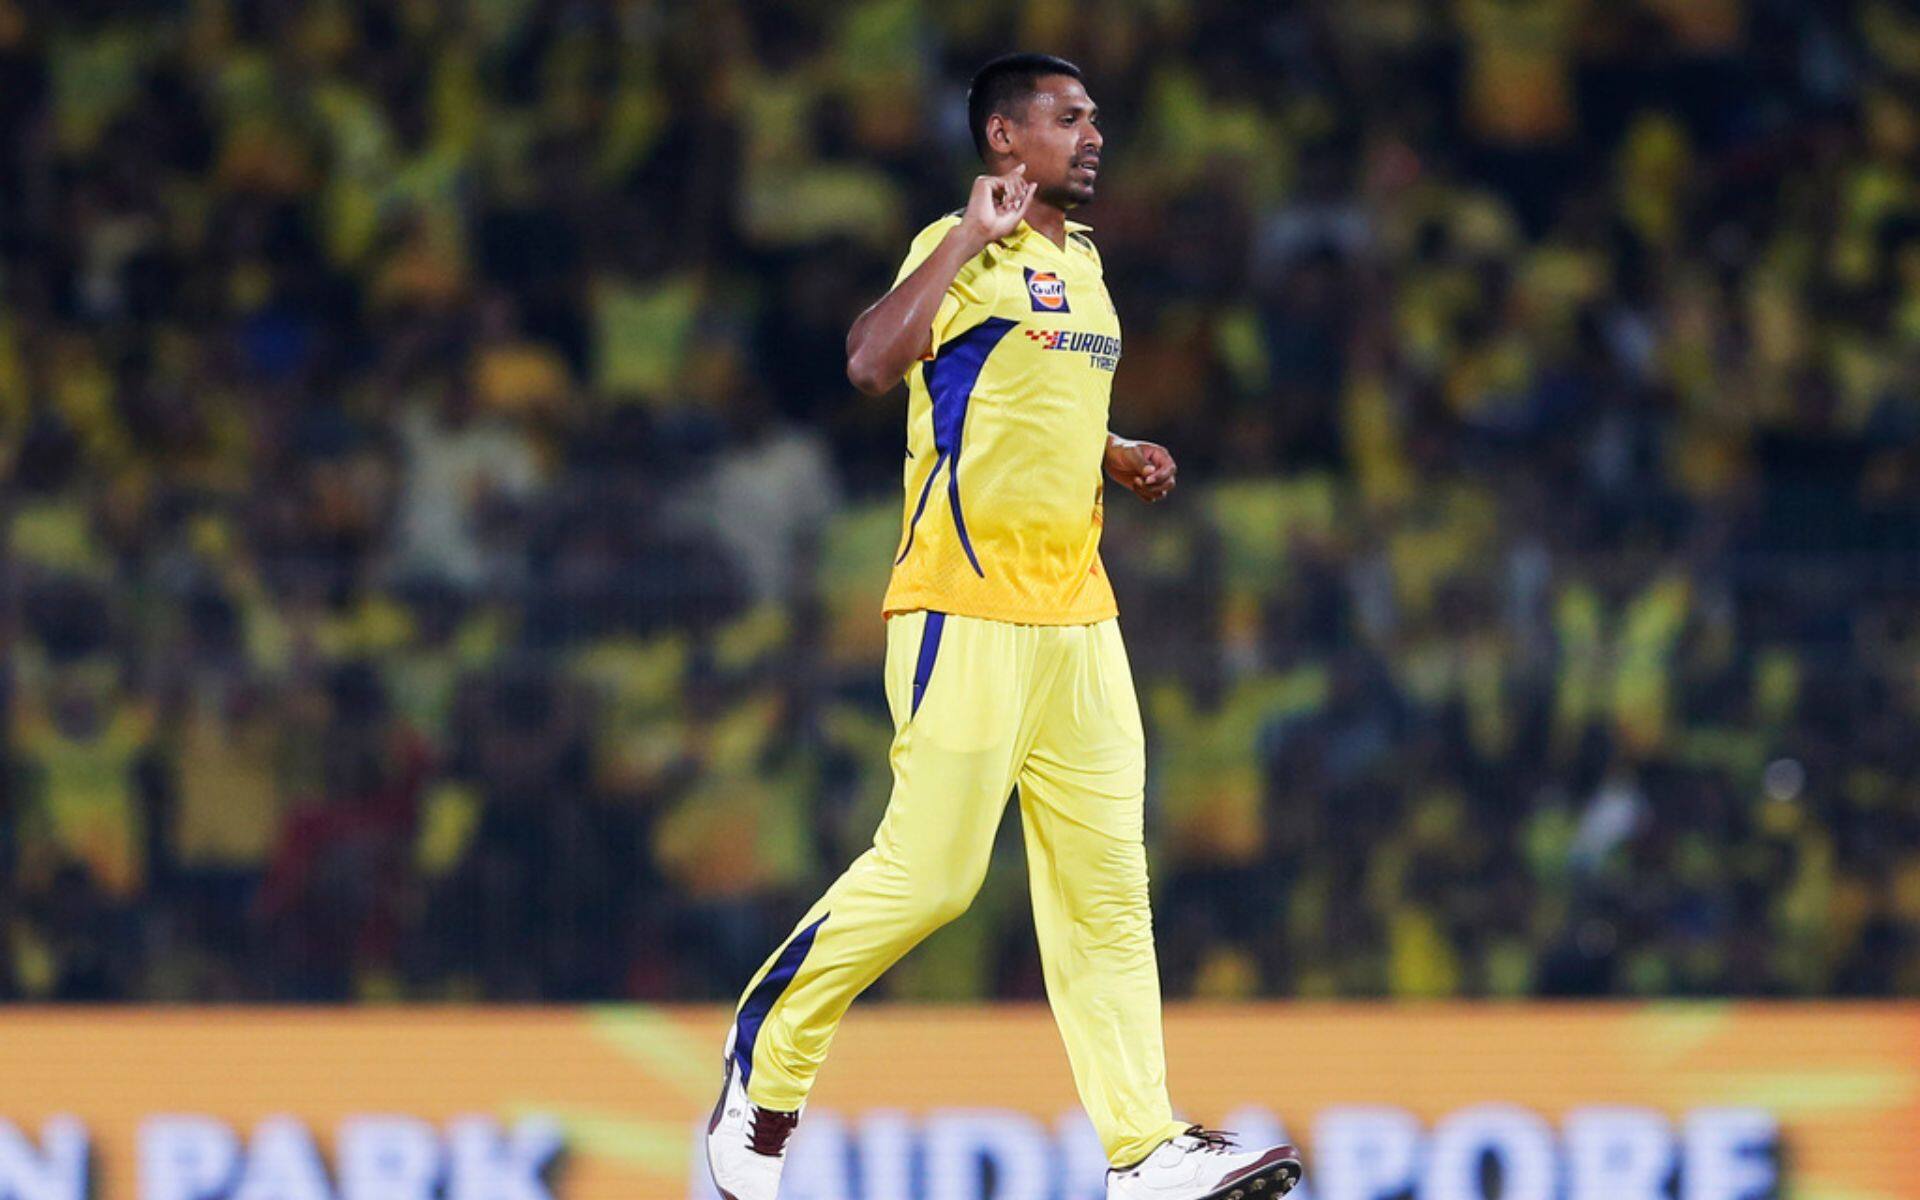 Mustafizur Rahman was not a part of the CSK playing unit in the game against SRH [iplt20.com]